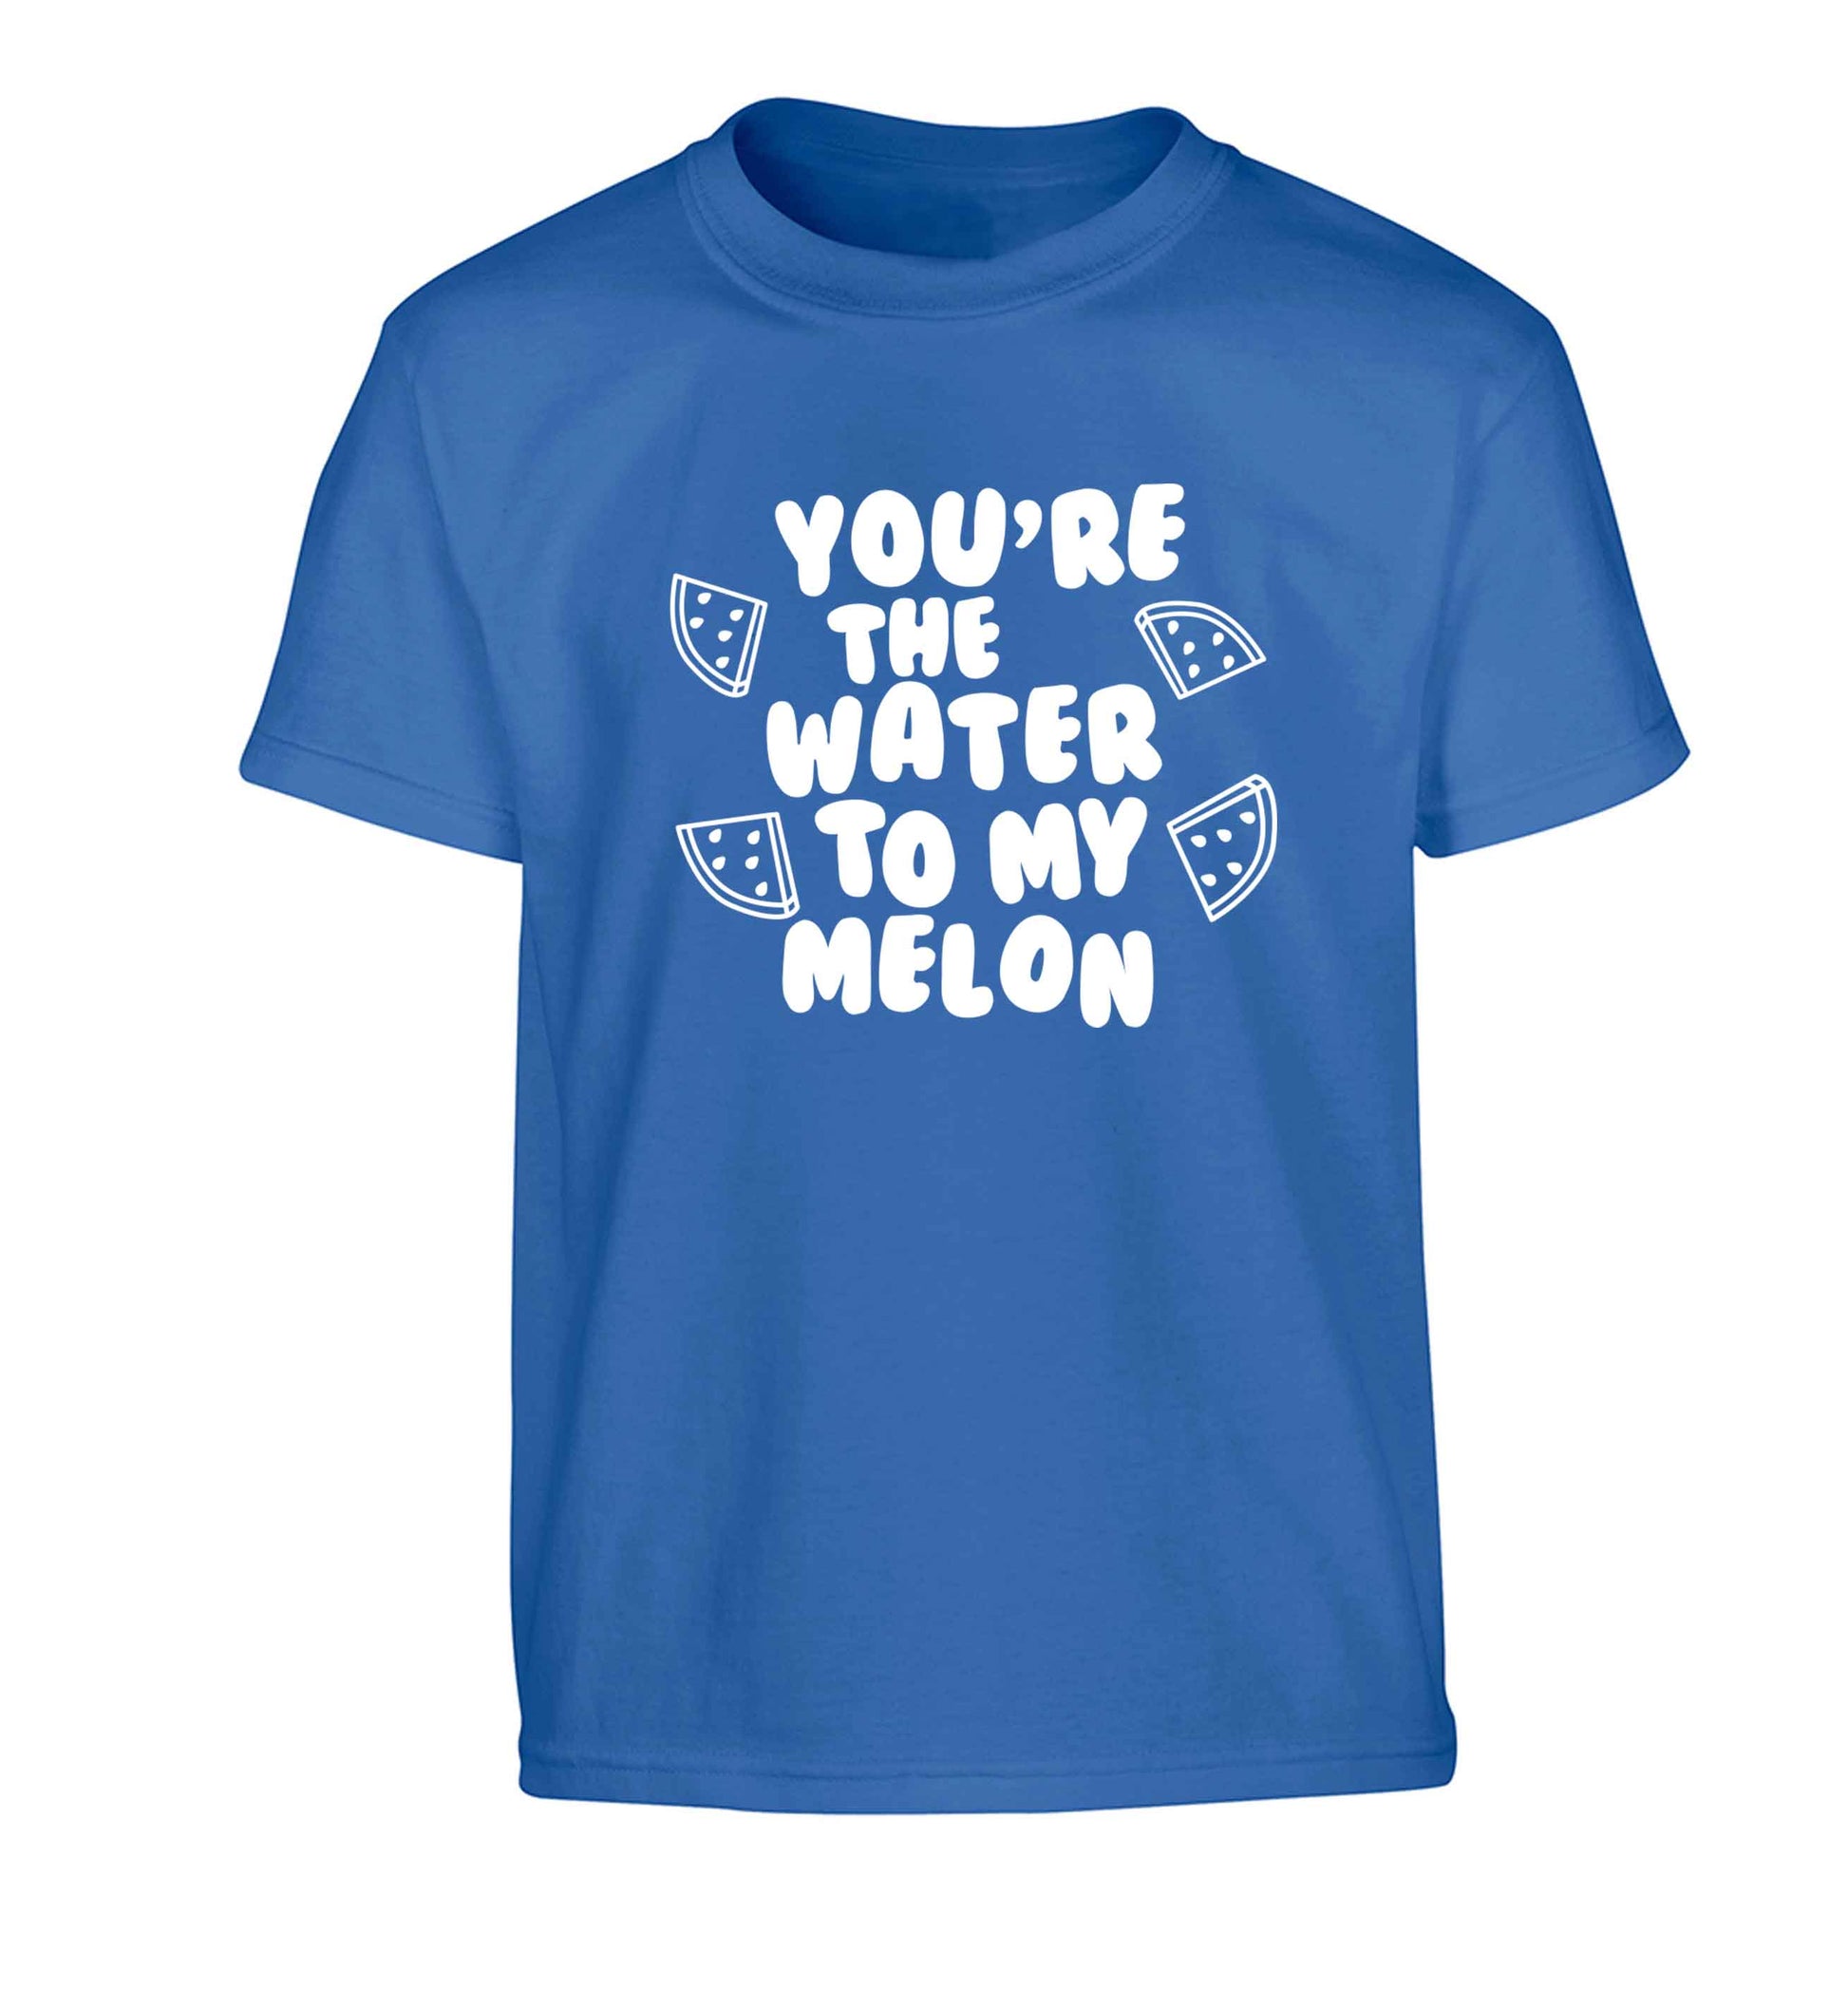 You're the water to my melon Children's blue Tshirt 12-13 Years